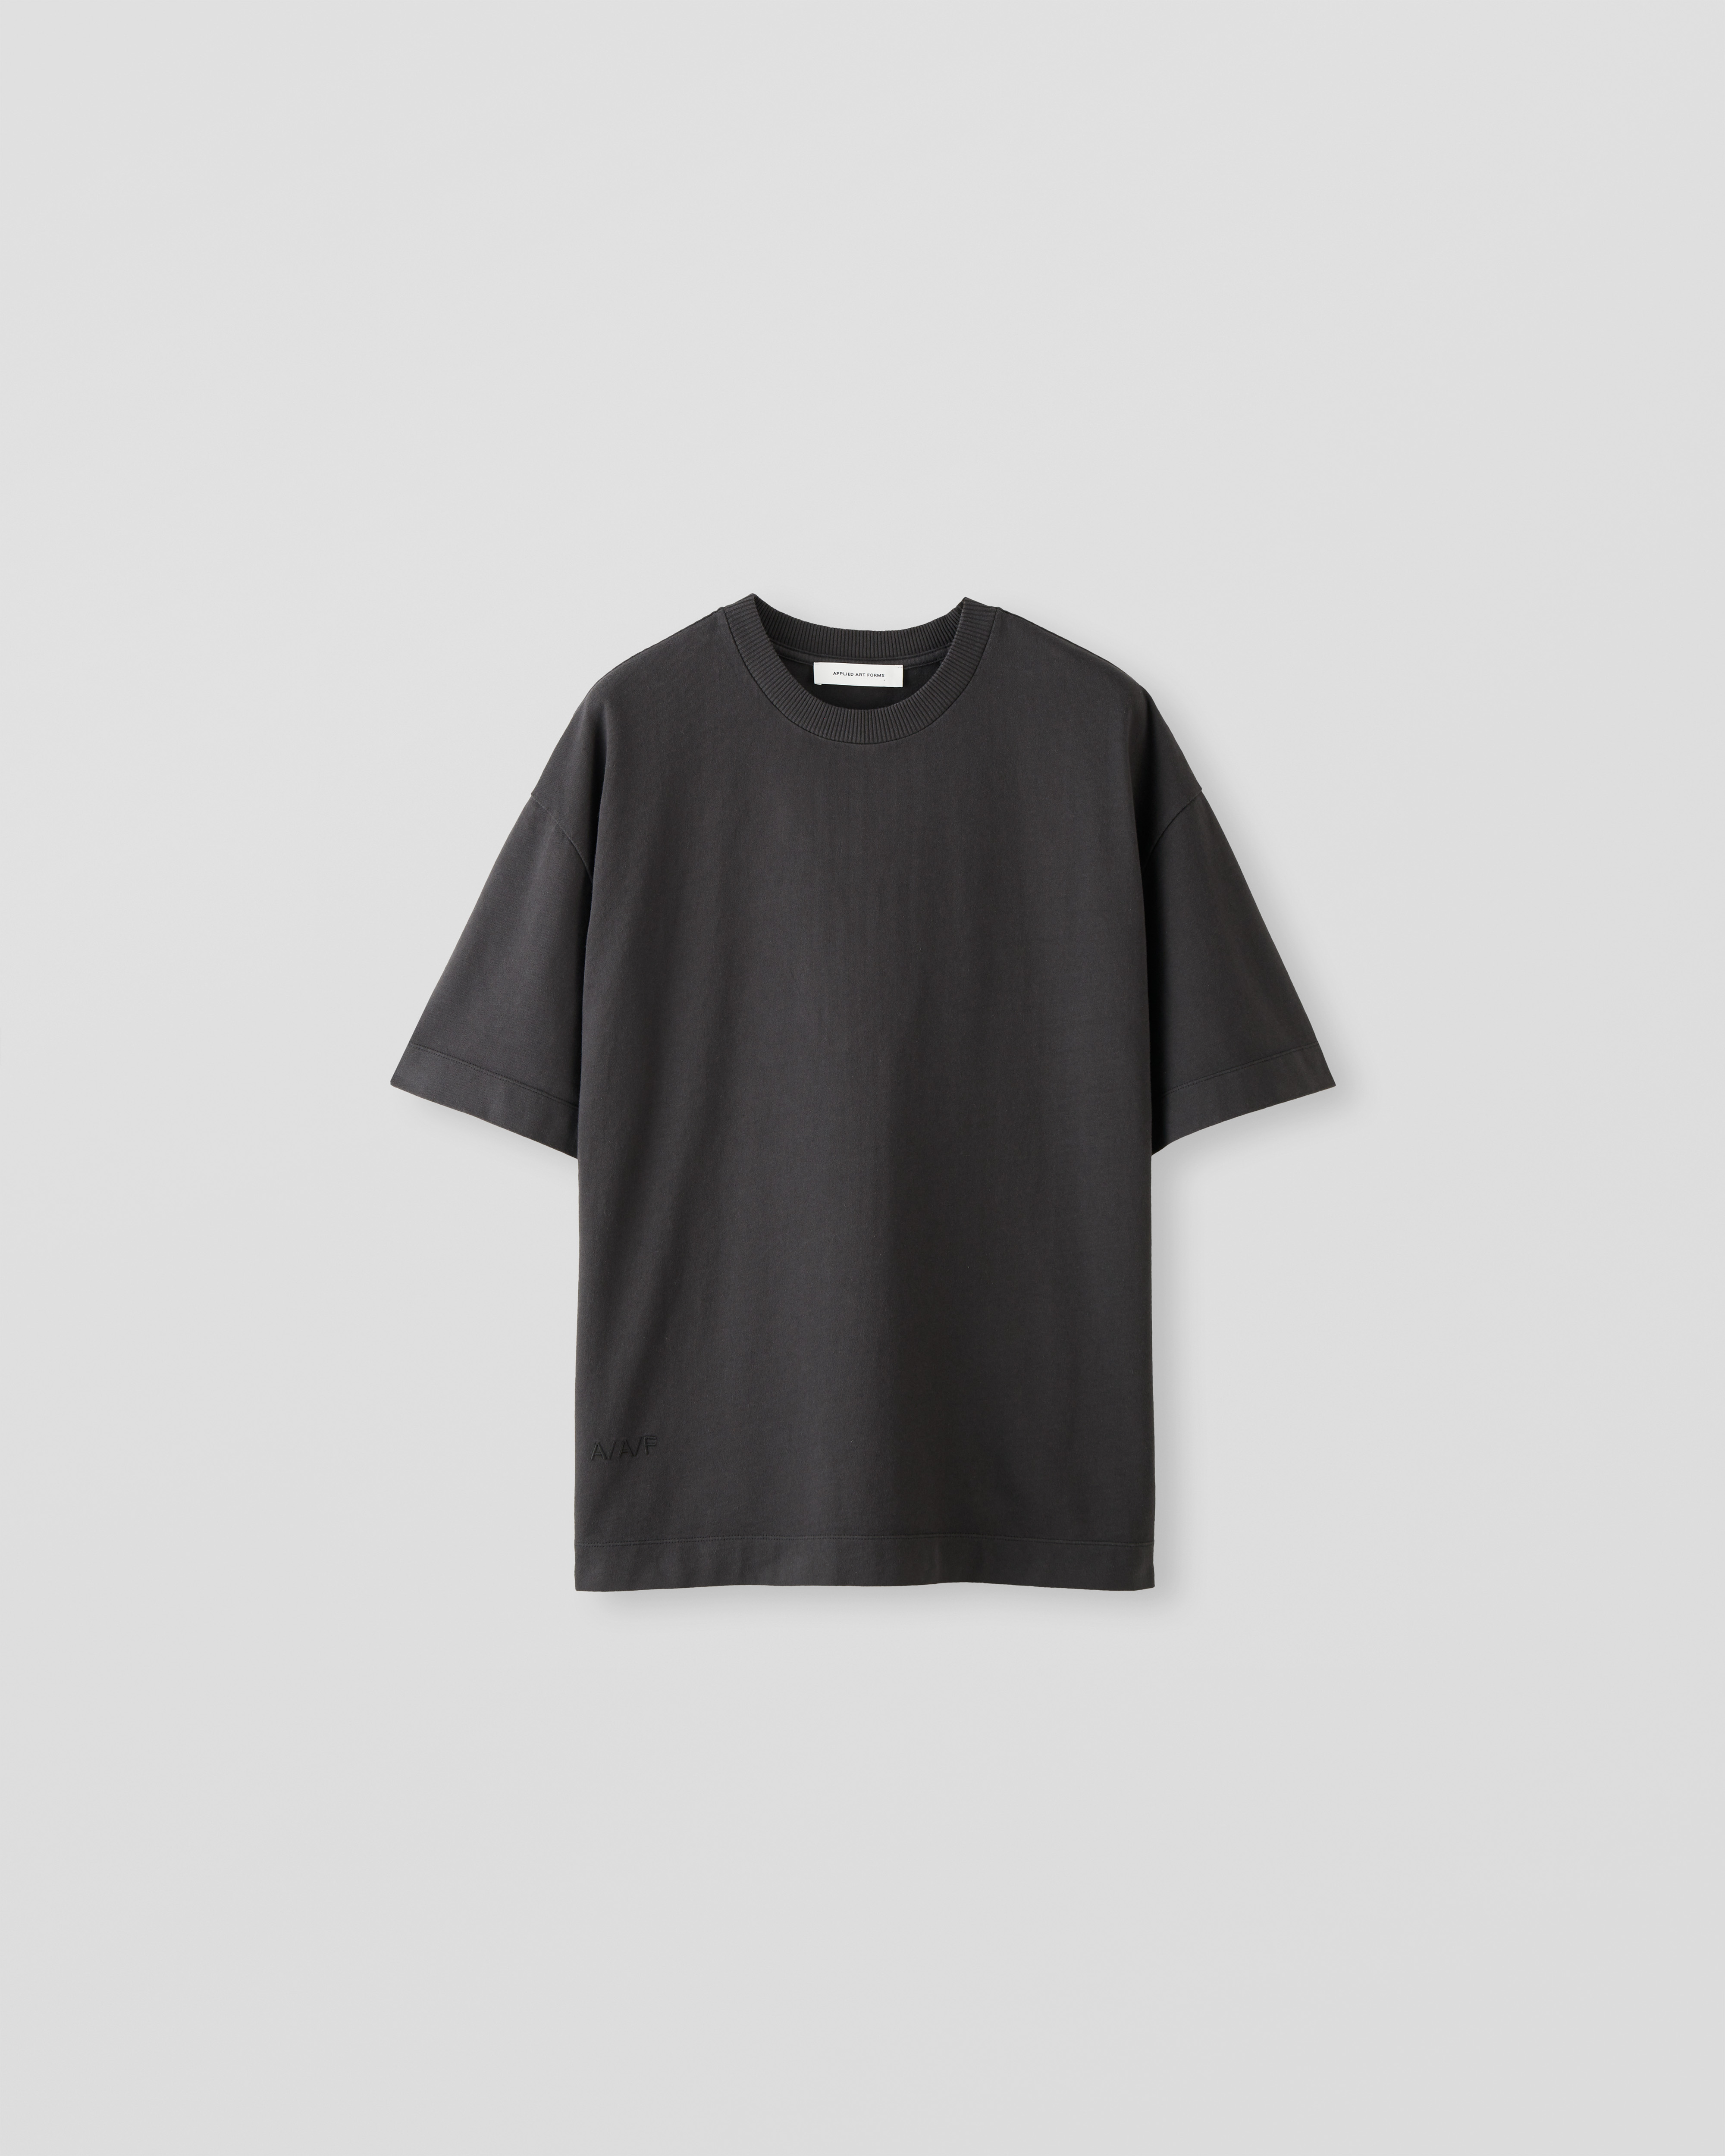 APPLIED ART FORMS OVERSIZED T-SHIRT - Tシャツ/カットソー(半袖/袖なし)